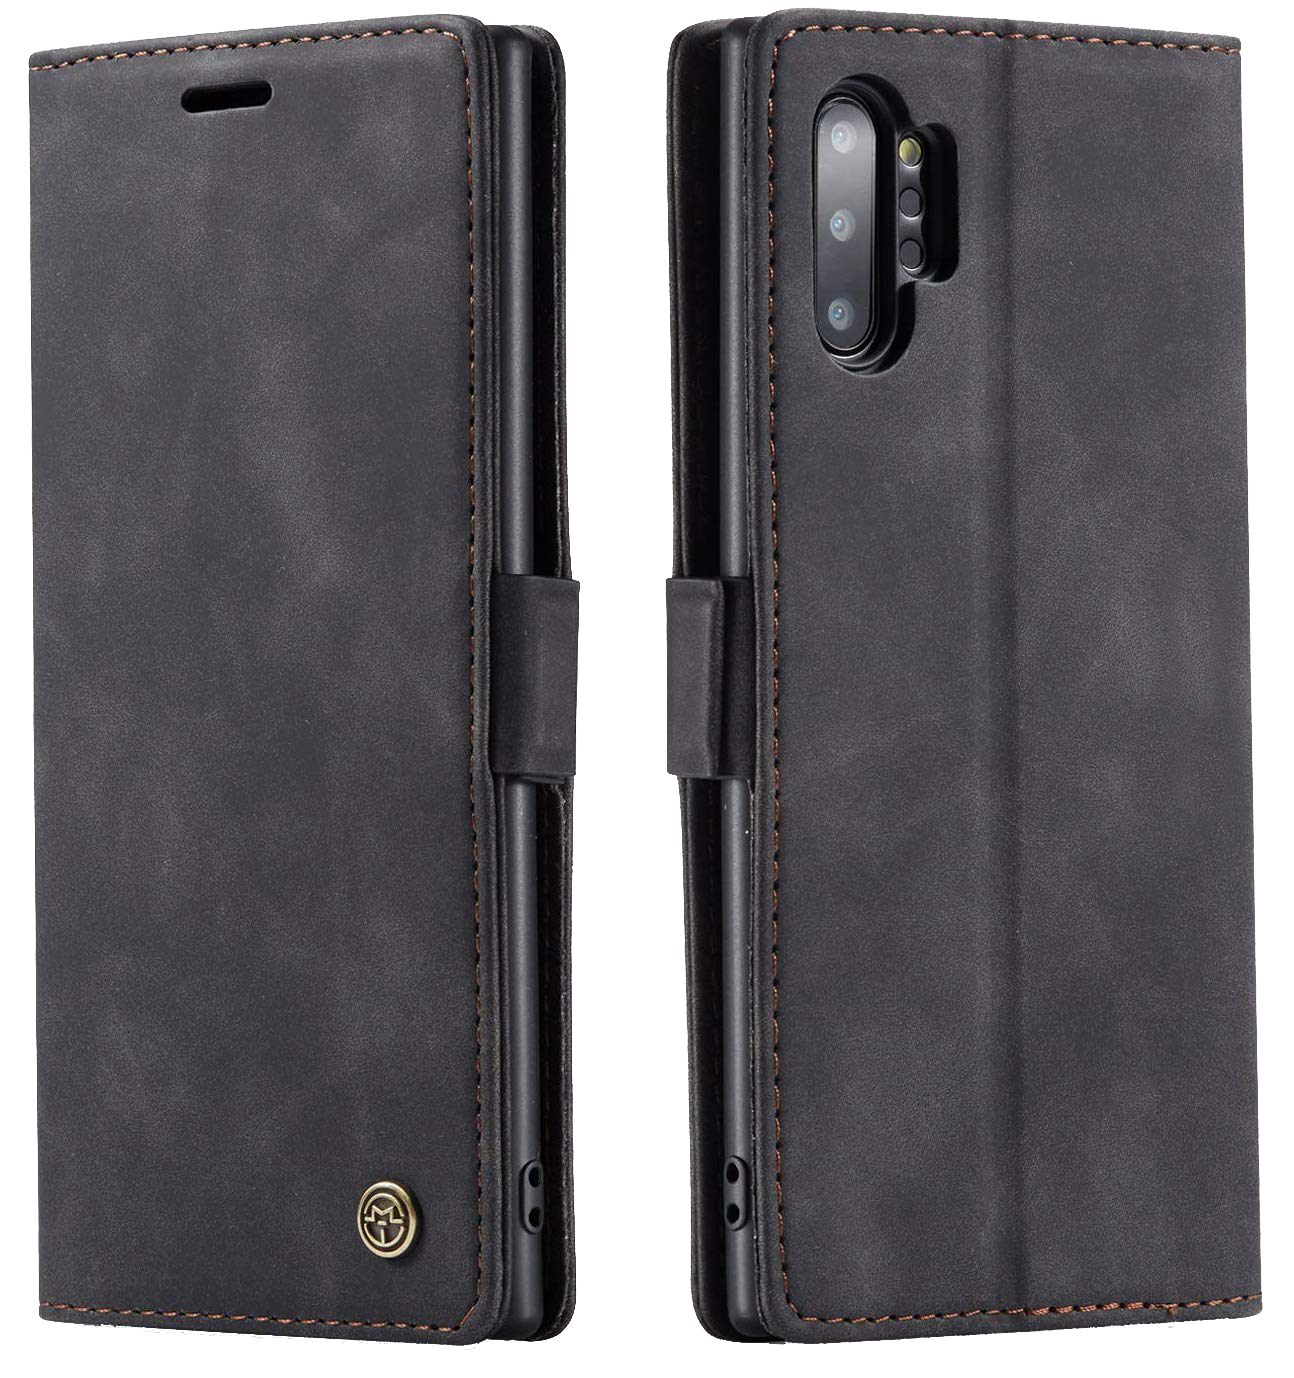 Samsung Galaxy Note 10 Plus black color leather wallet flip cover case By excelsior